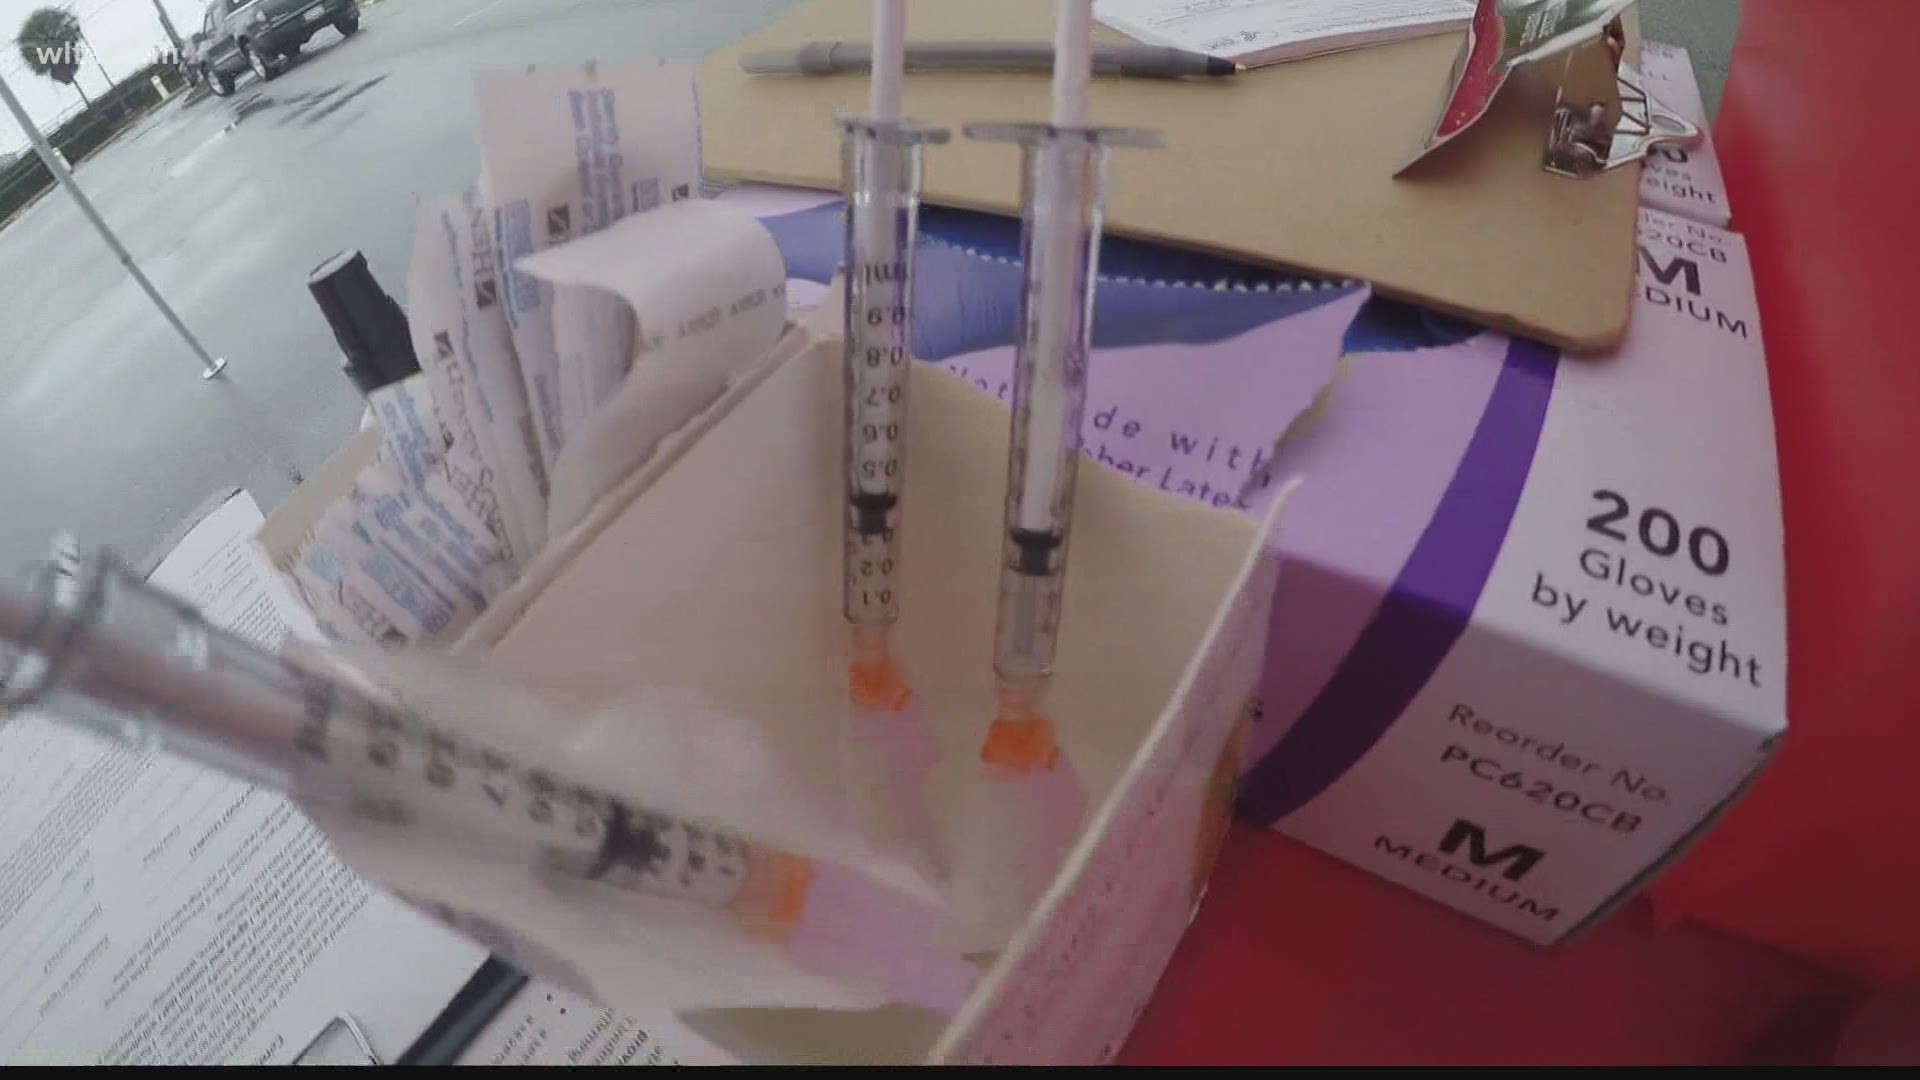 South Carolina's health agency says they're seeing high demand for COVID-19 vaccination appointments.